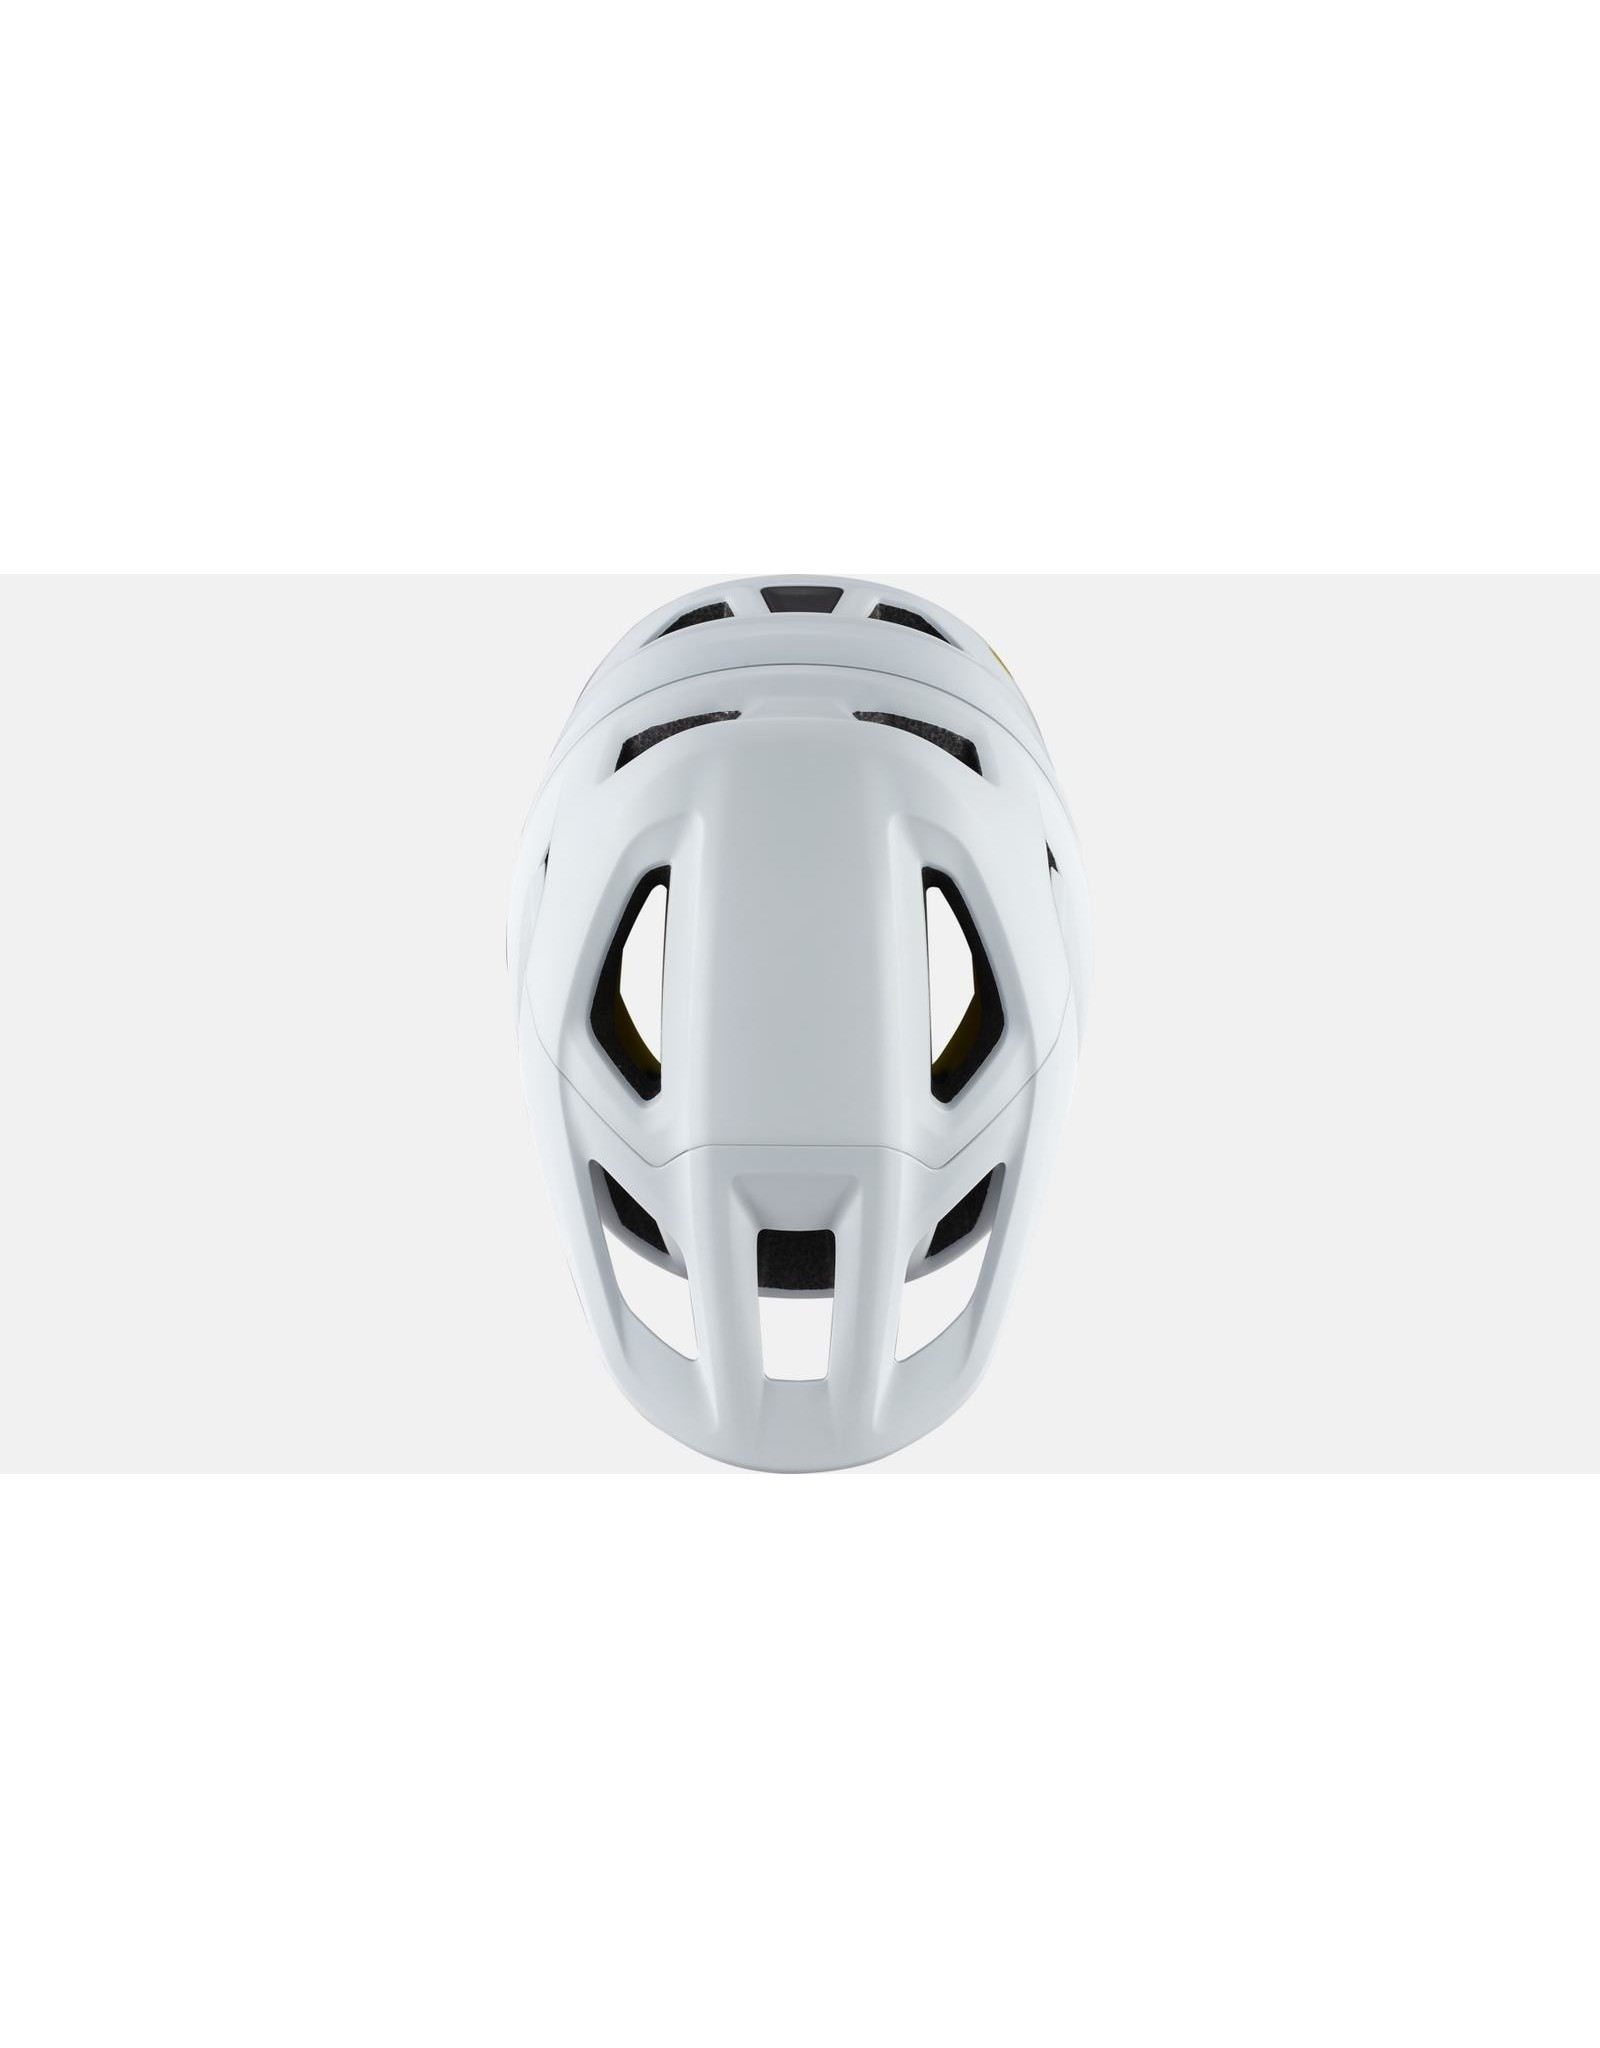 SPECIALIZED Specialized Camber Helmet - White - M